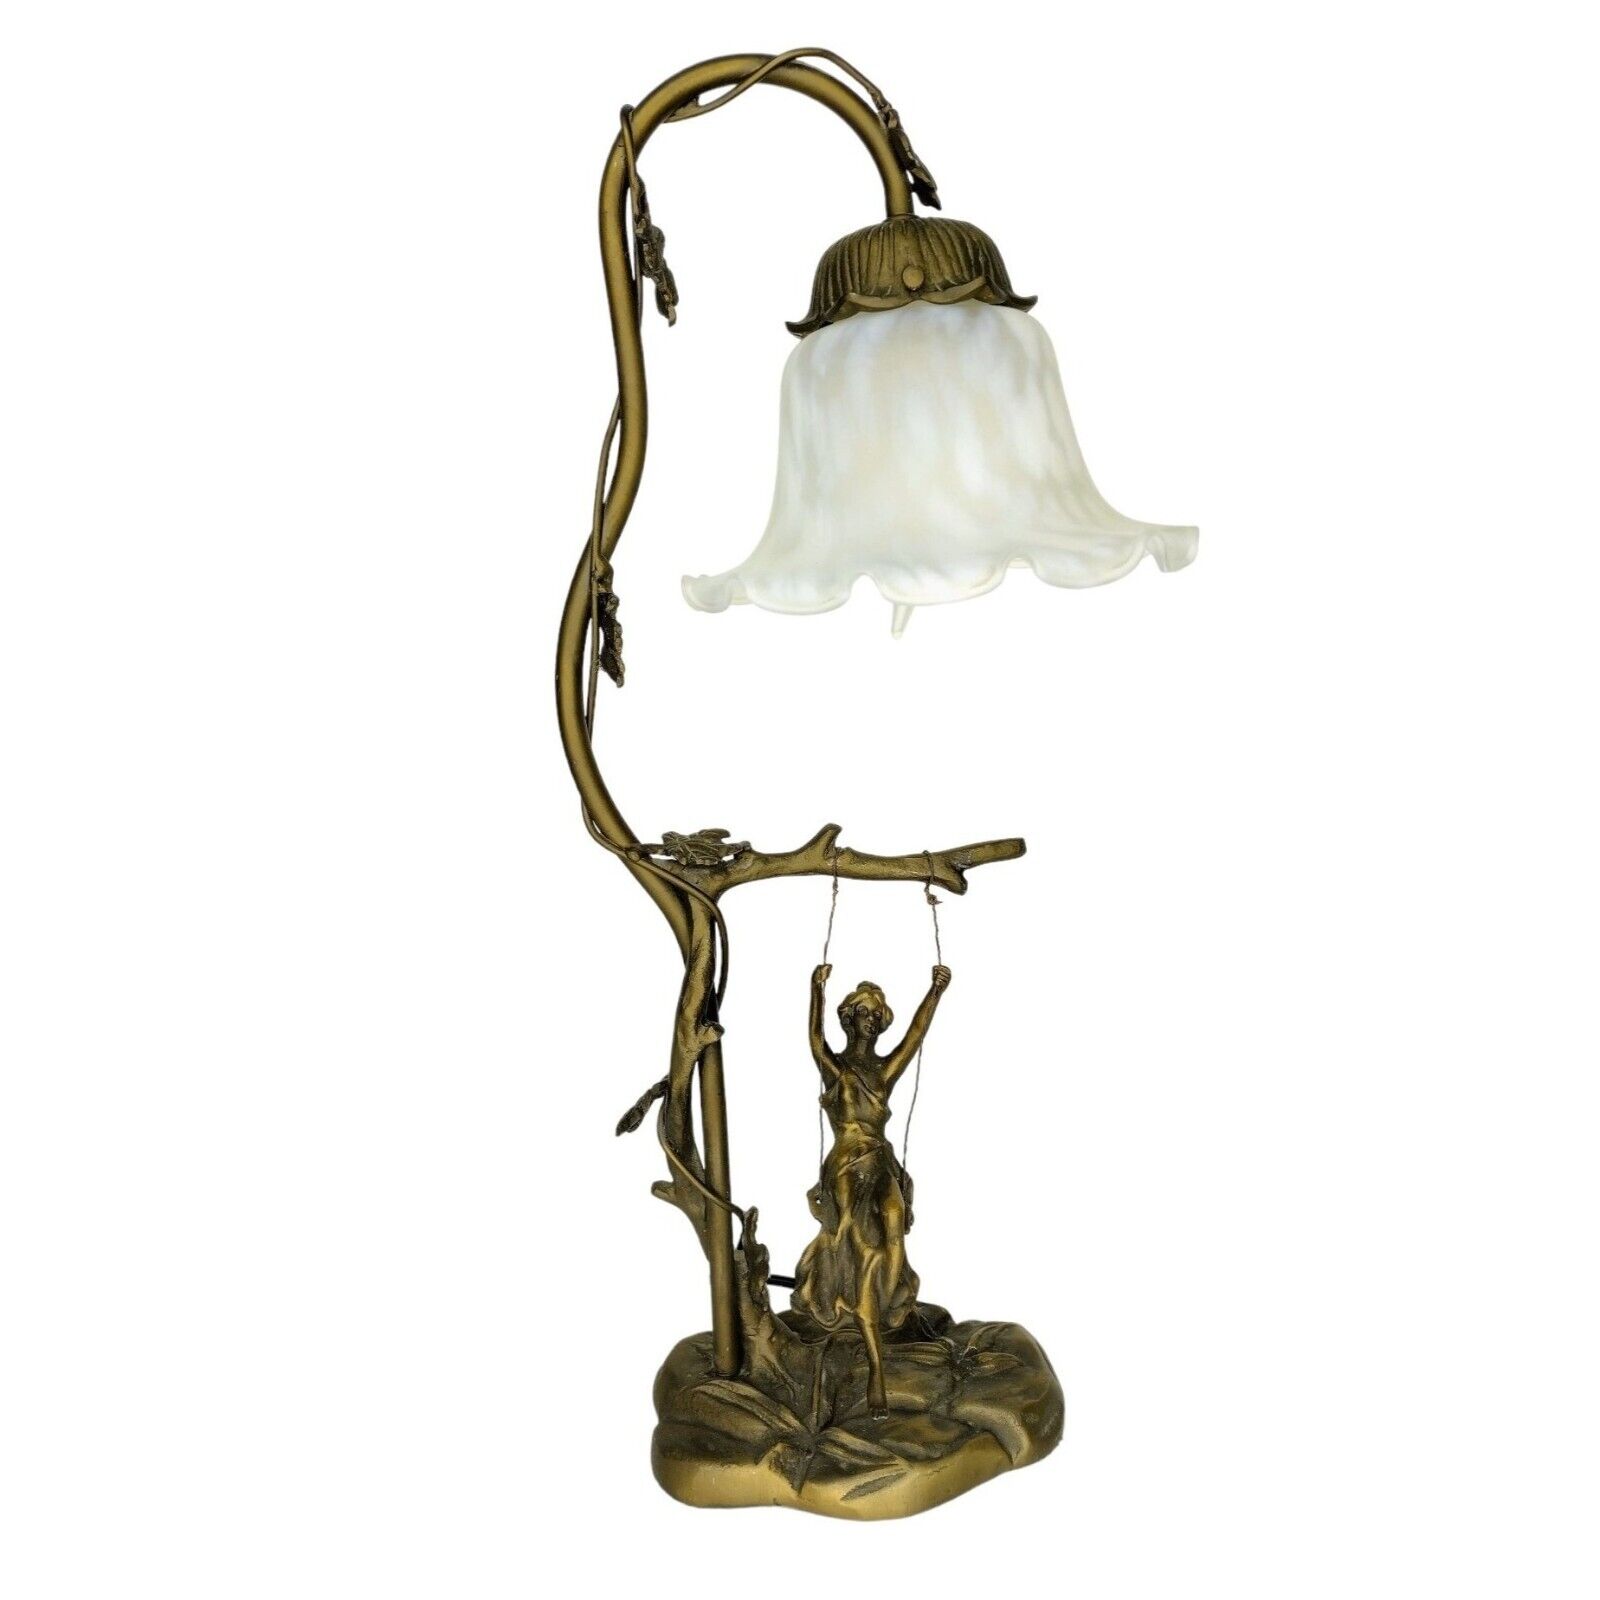 Vintage Art Nouveau Bronze Girl On A Swing Table Lamp Tulip Lampshade RARE